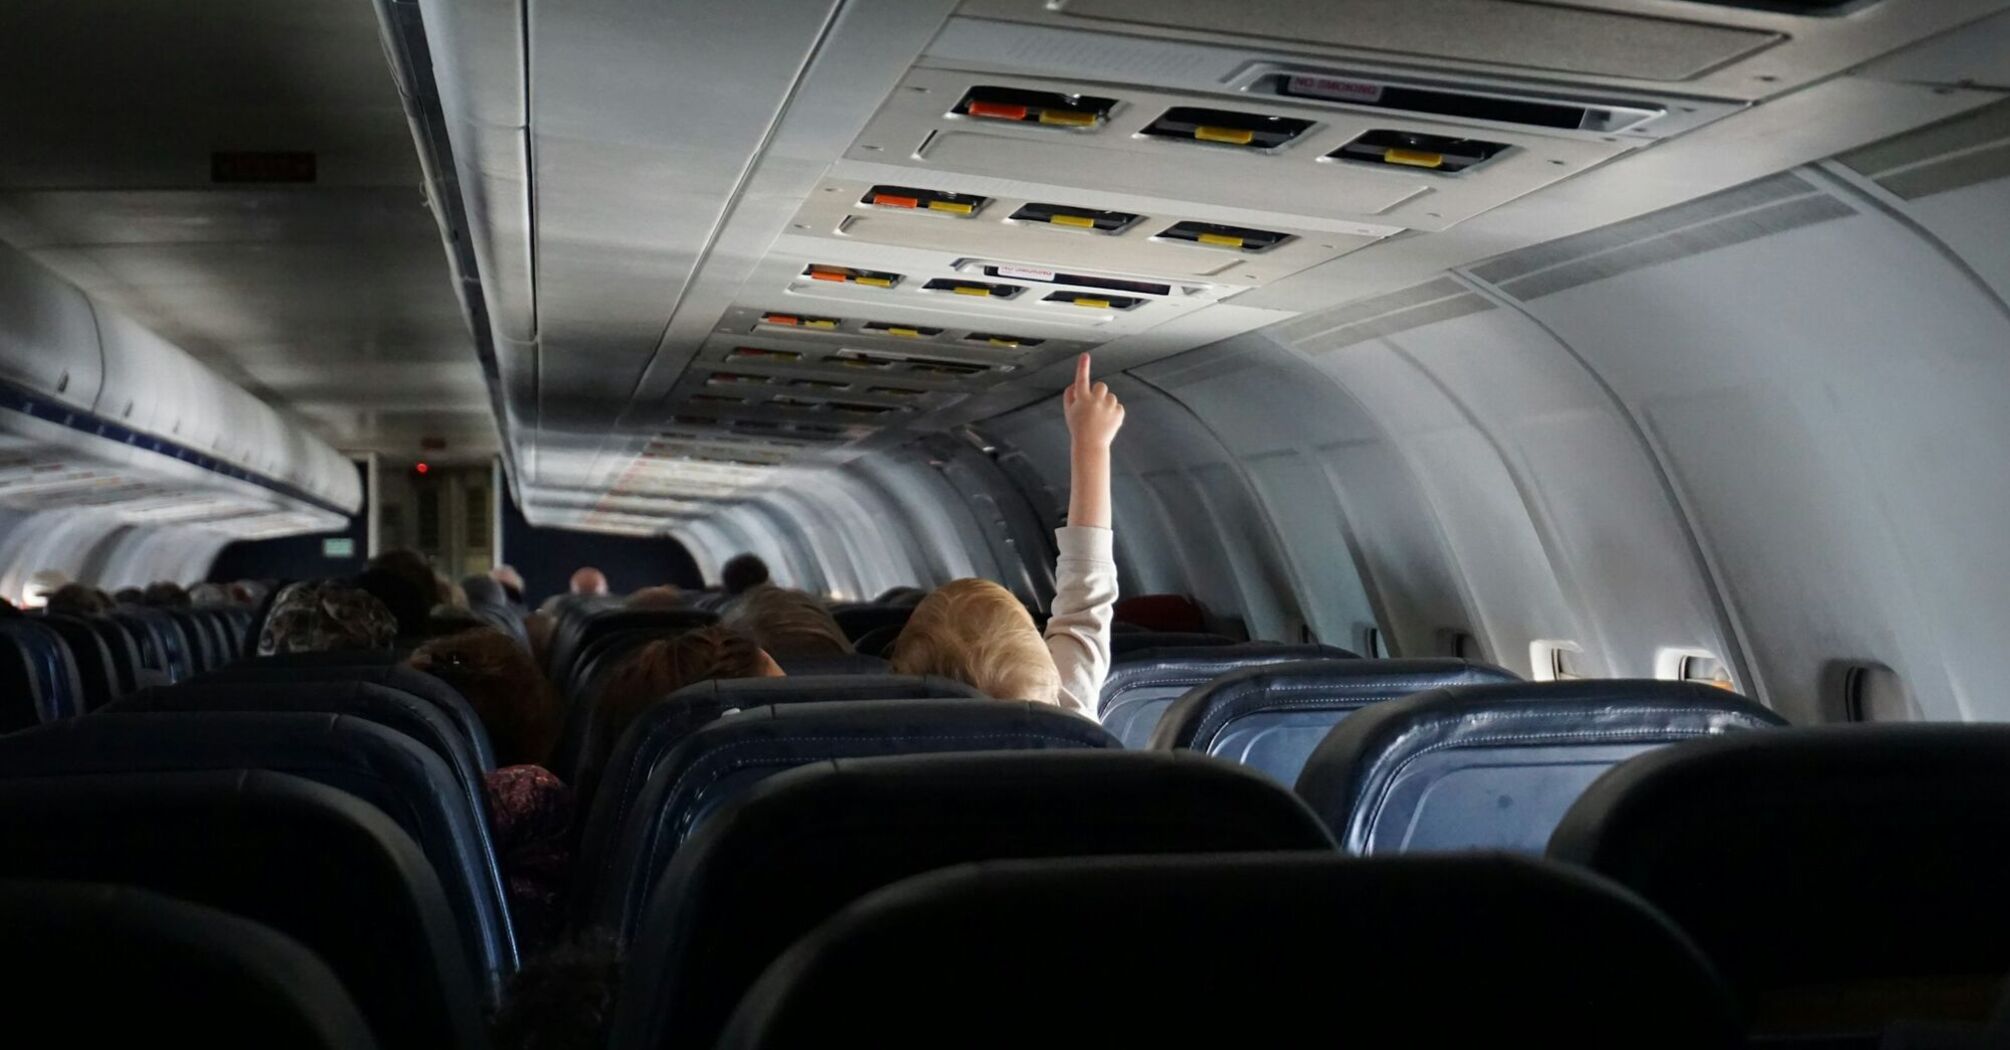 Child reaching up to overhead bins in airplane aisle